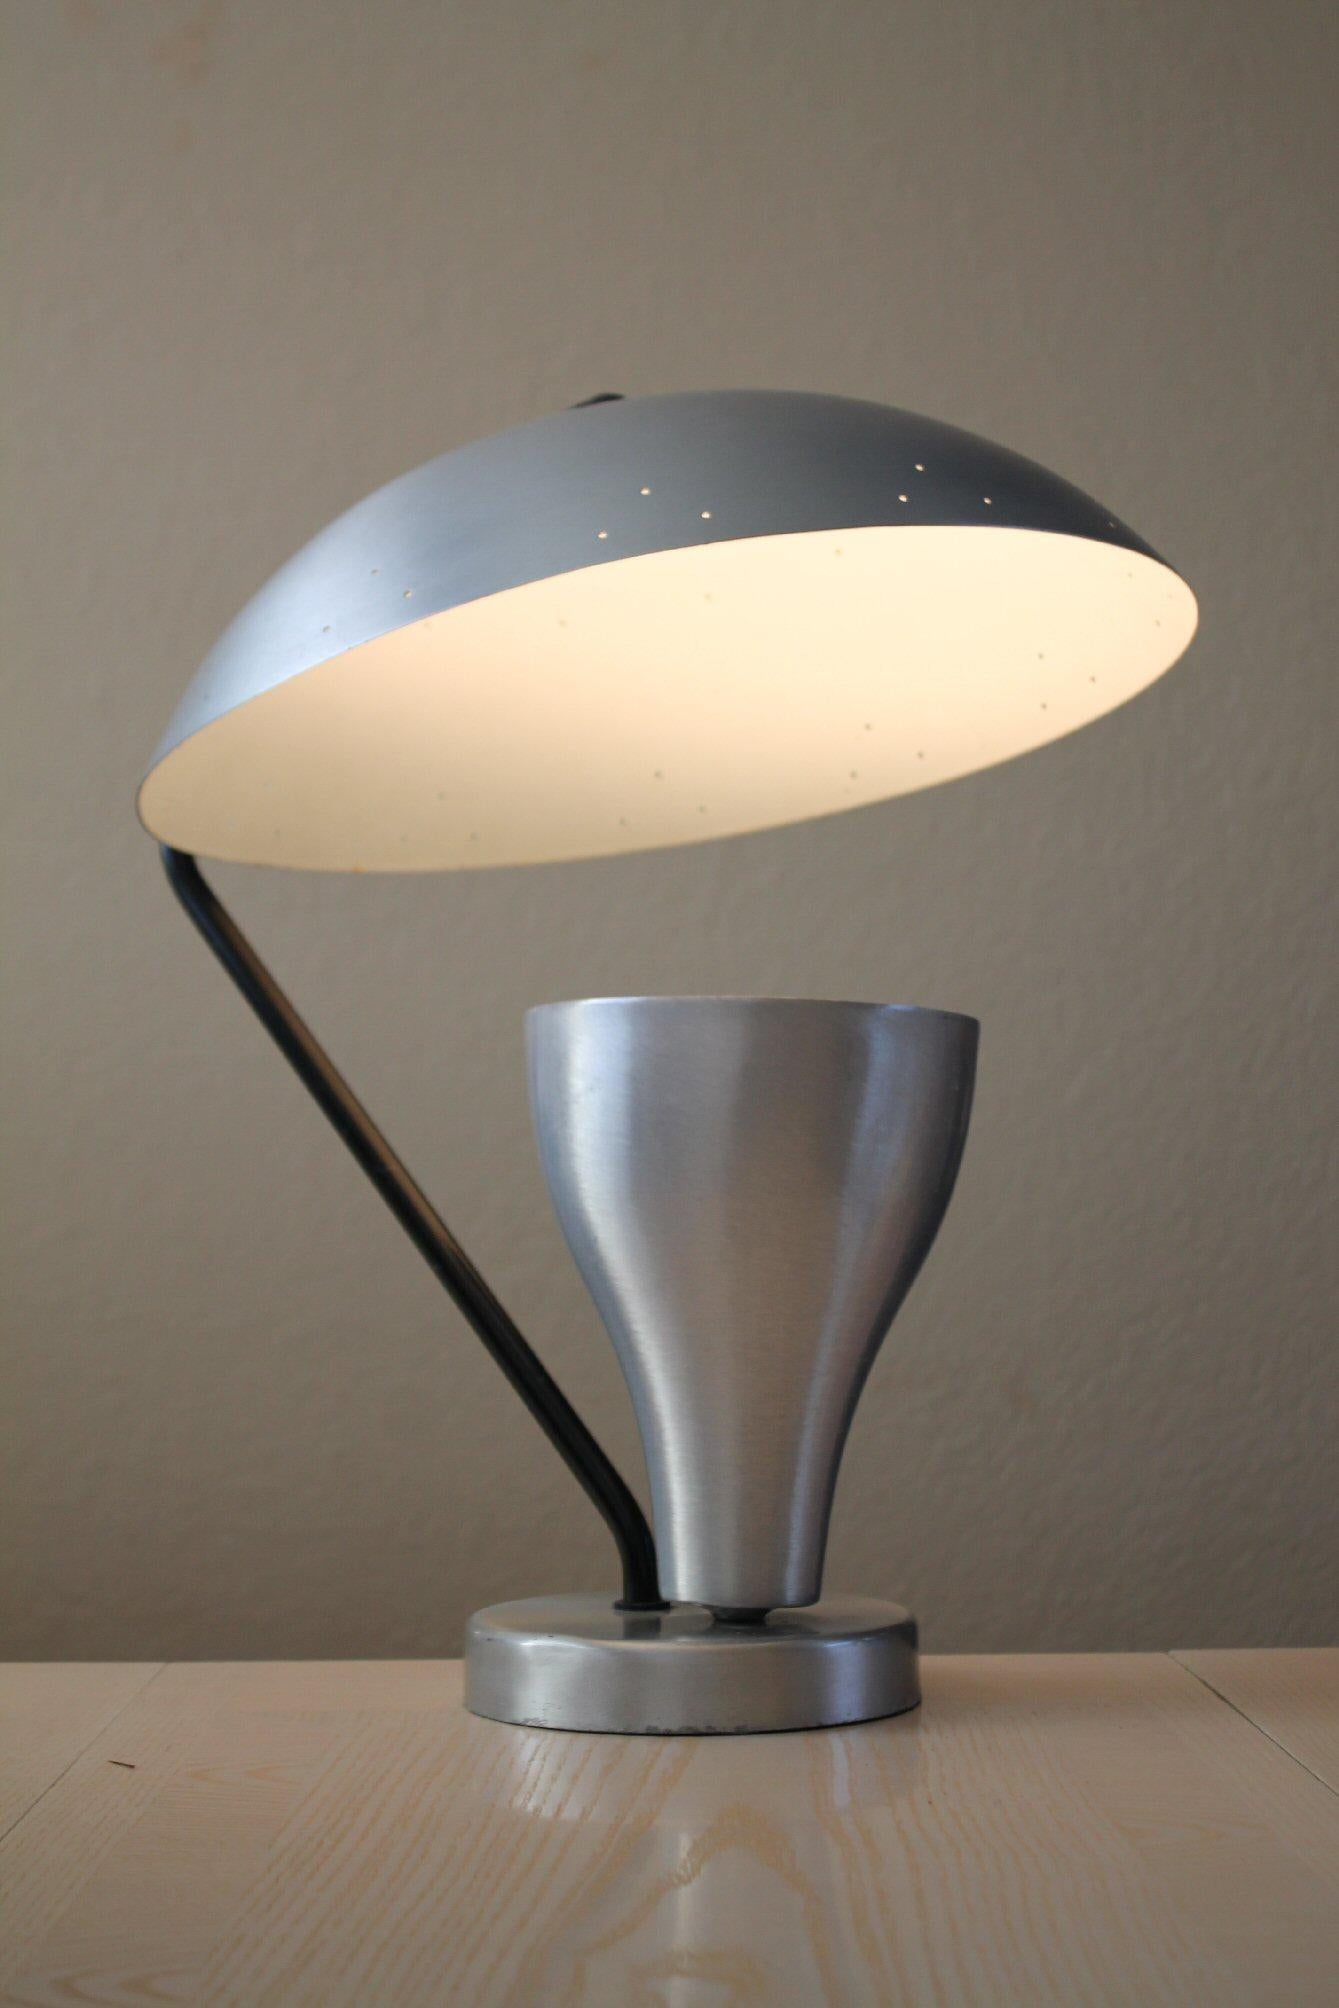 American Mid Century Modern Aluminum Saucer Reflector Lamp Russel Wright 50s Art Deco For Sale